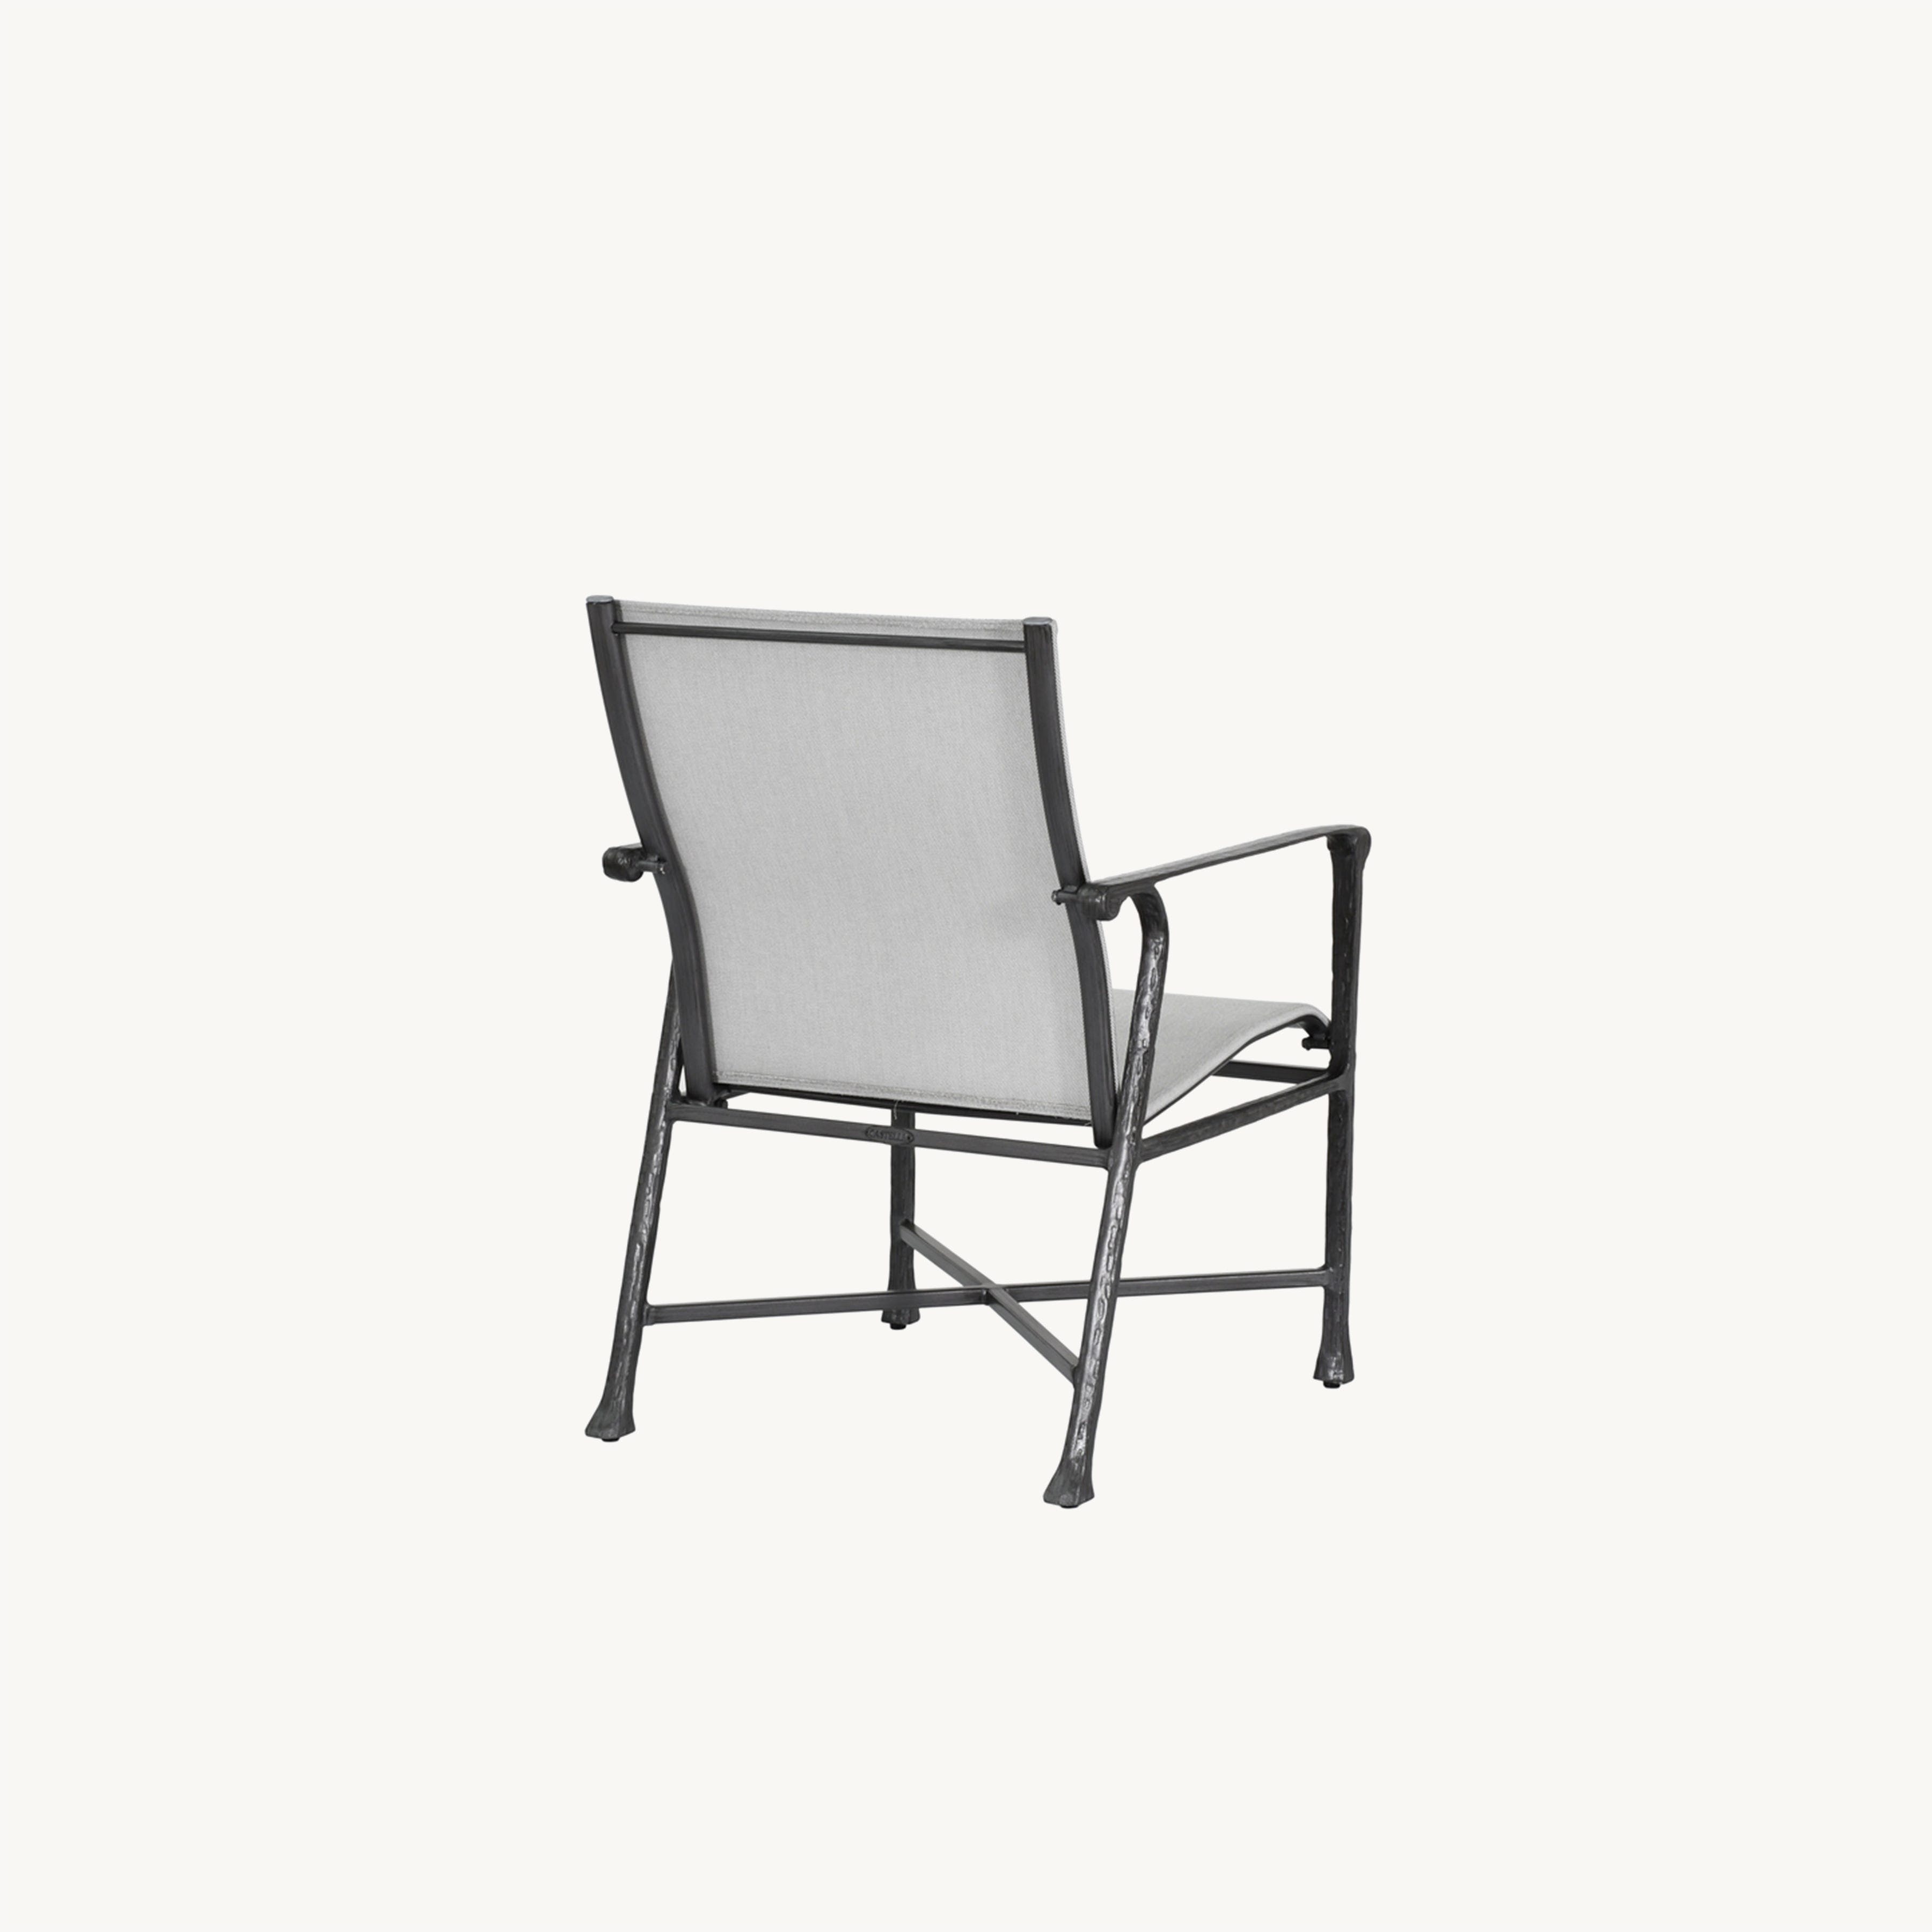 Marquis Sling Dining Chair By Castelle